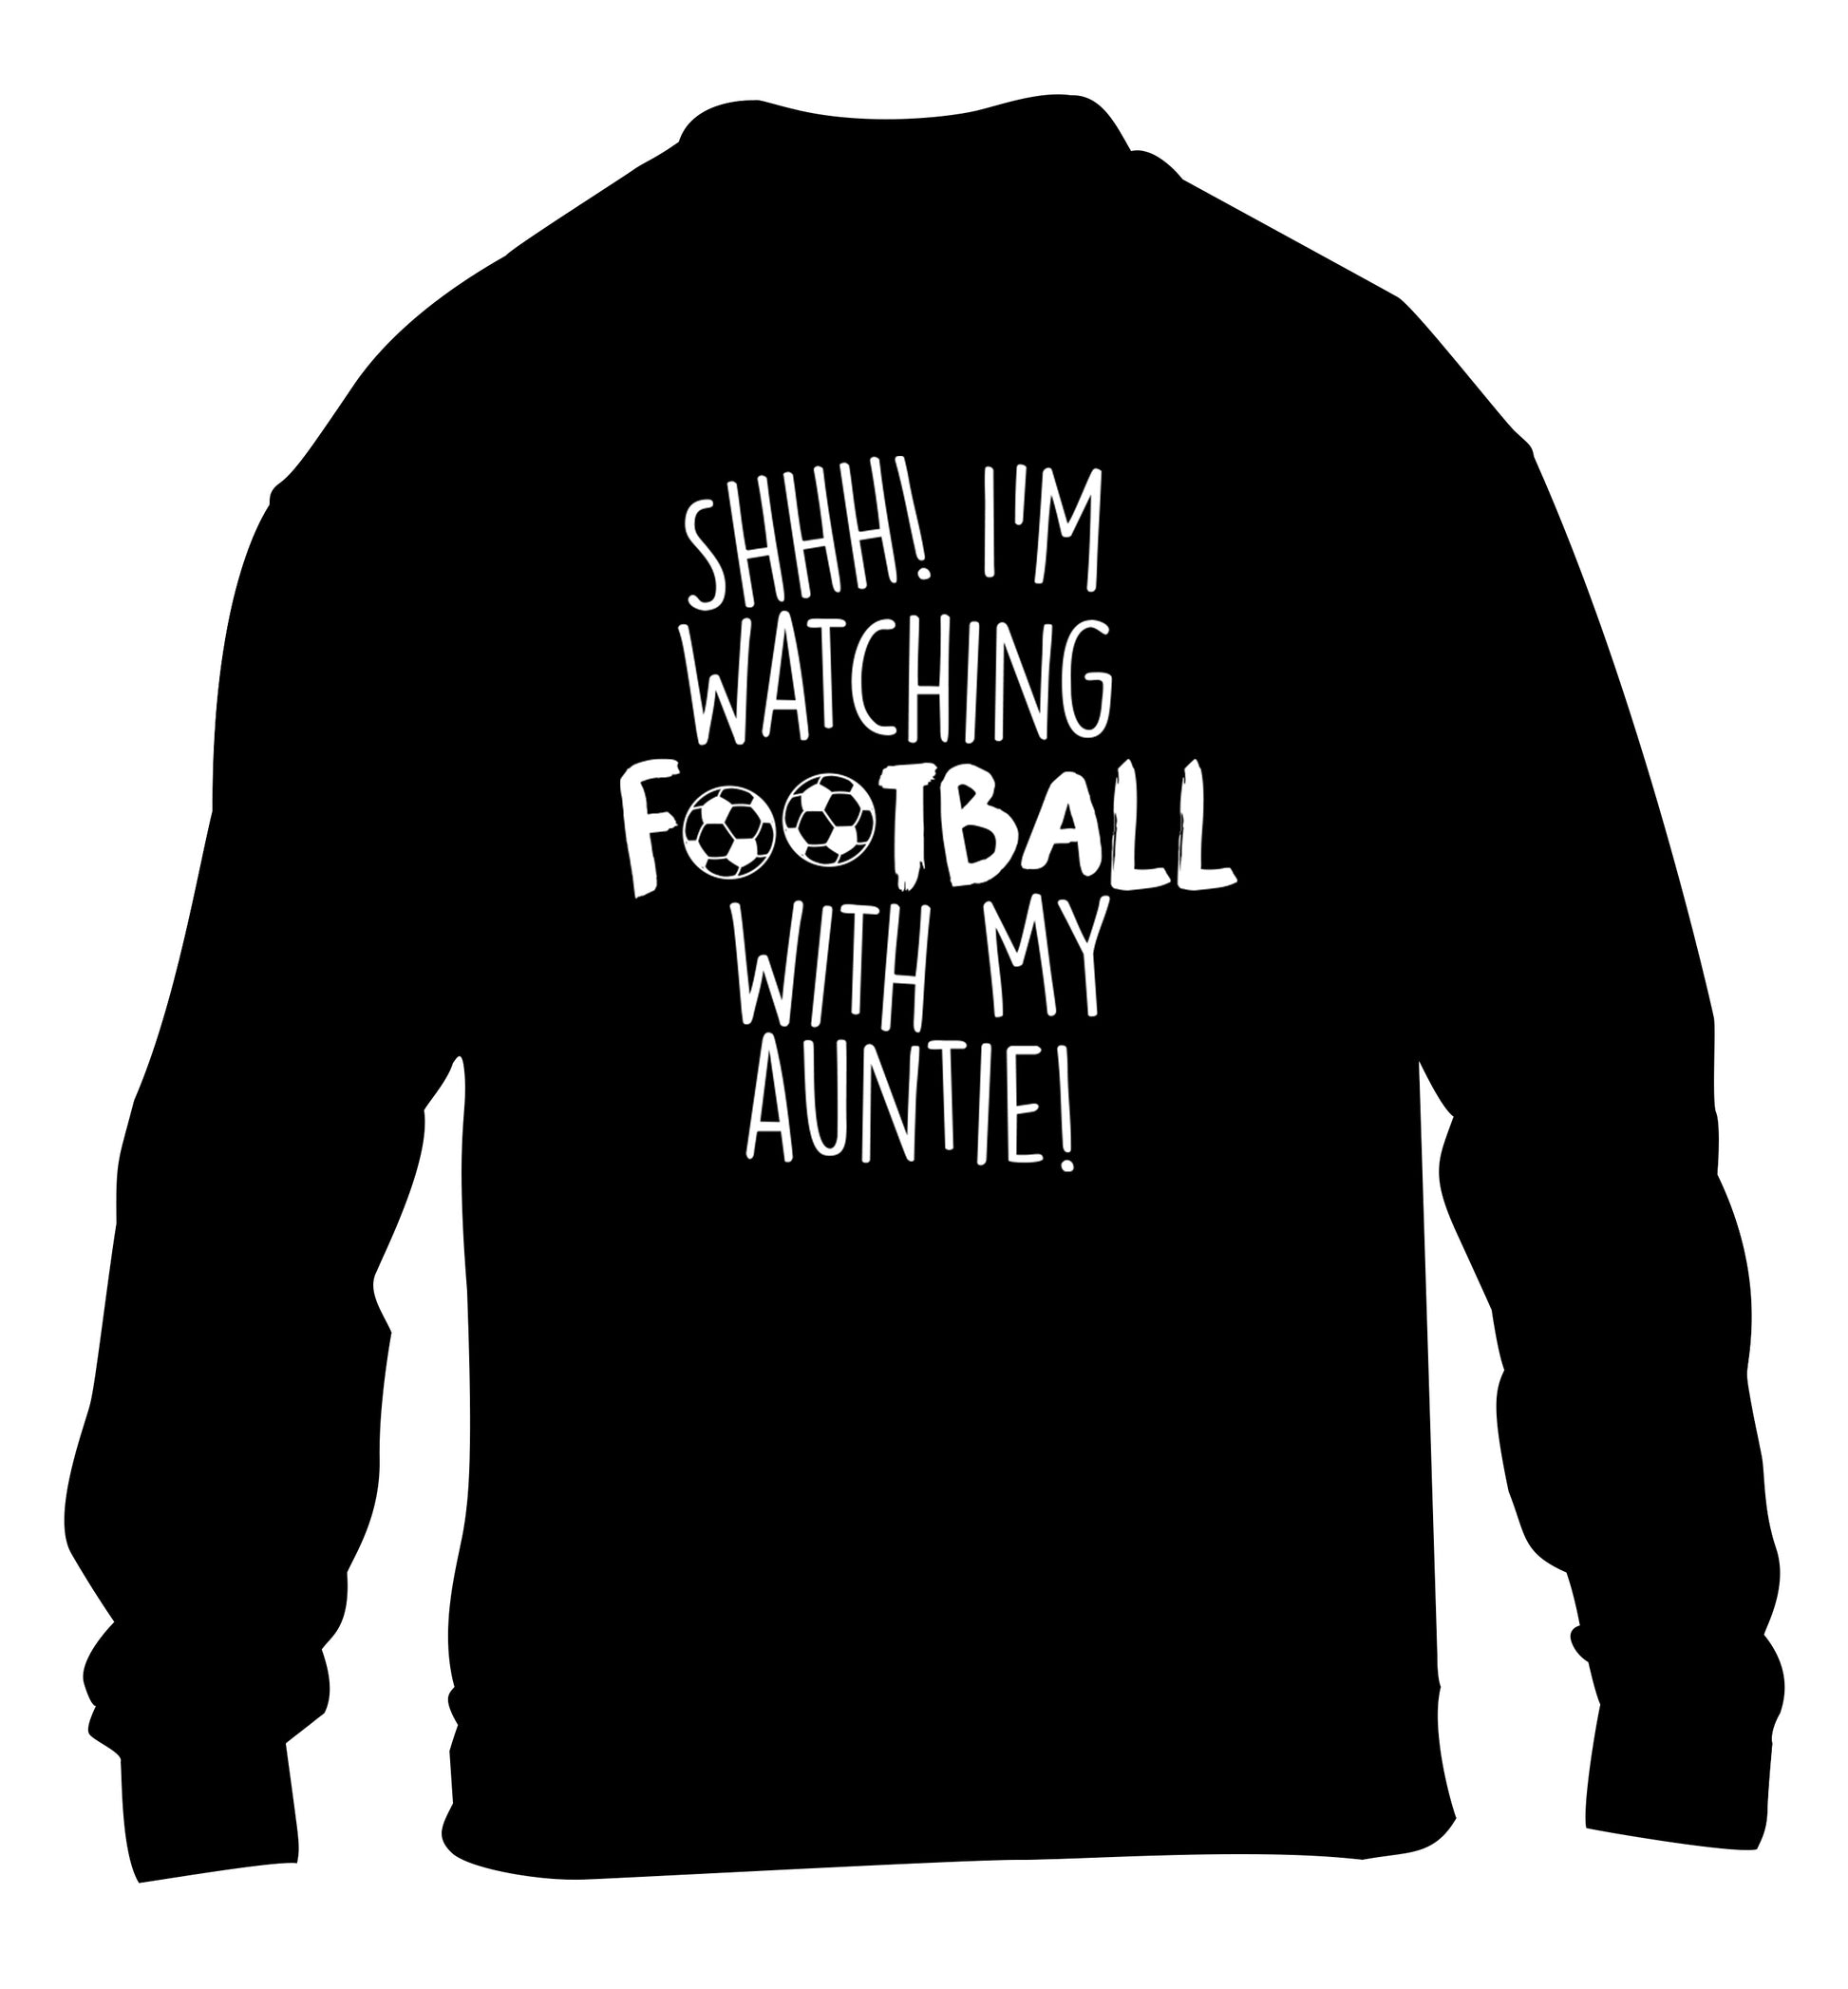 Shhh I'm watching football with my auntie children's black sweater 12-14 Years